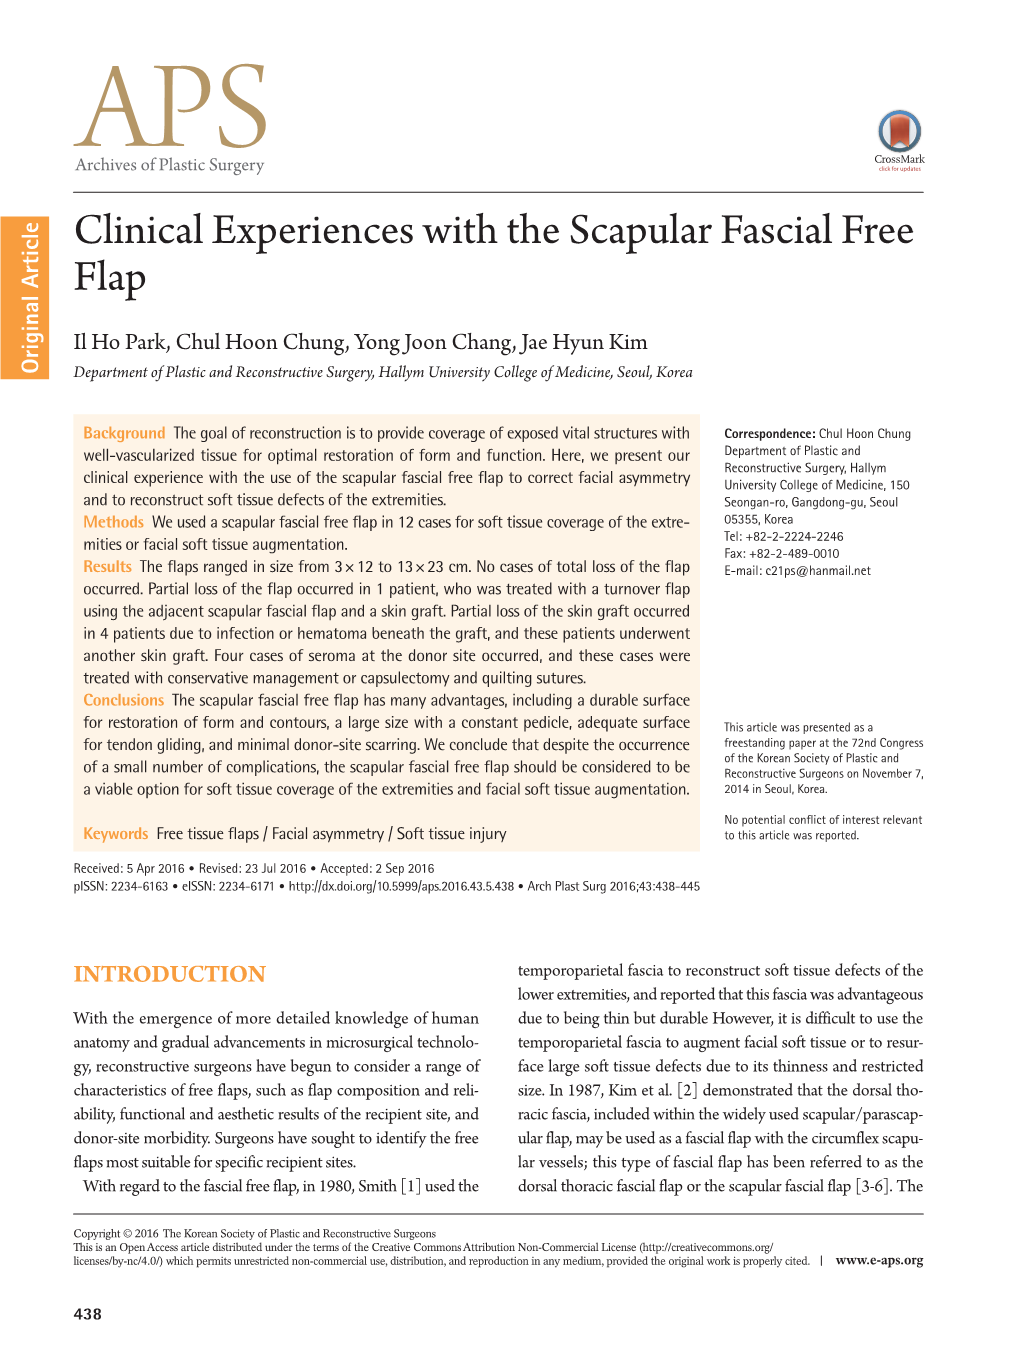 Clinical Experiences with the Scapular Fascial Free Flap